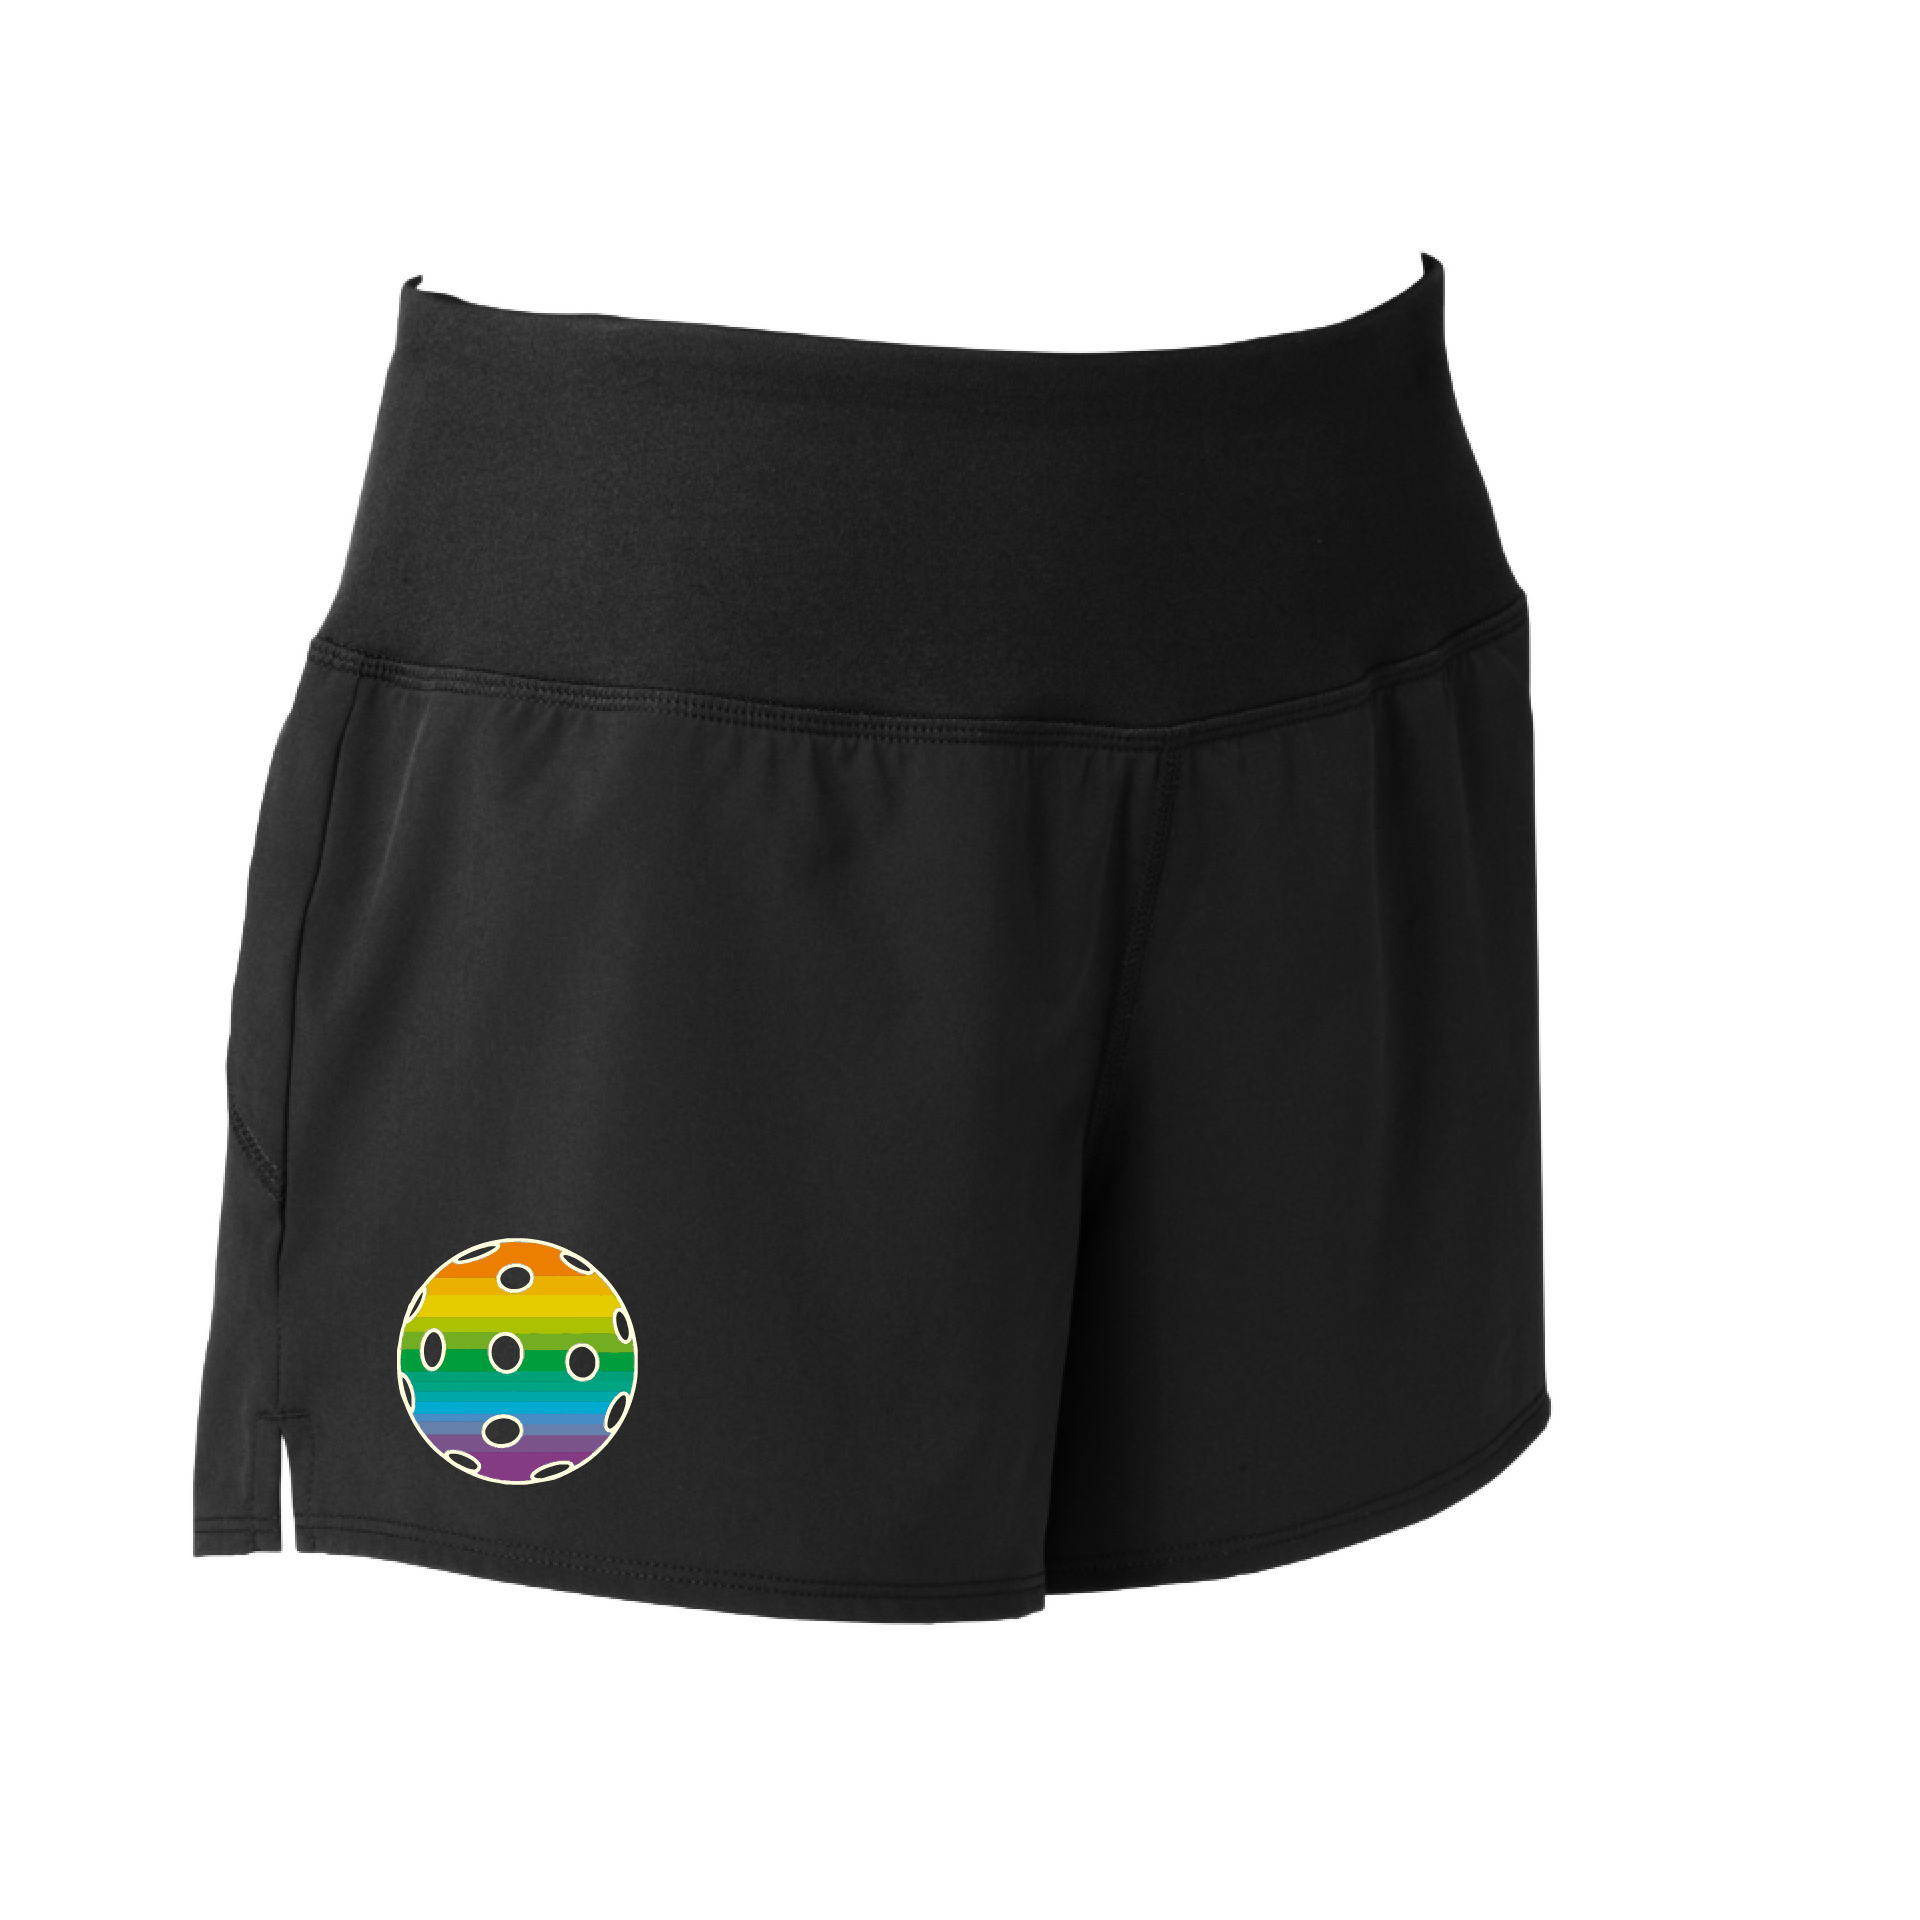 Pickleball Short Design: Customizable Pickleball Color: Choose from: Purple, Rainbow, Yellow and White.  Sport Tek women’s repeat shorts come with built-in cell phone pocket on the exterior of the waistband. You can also feel secure knowing that no matter how strenuous the exercise, the shorts will remain in place (it won’t ride up!). These shorts are extremely versatile and trendy. Transition from the Pickleball court to running errands smoothly.